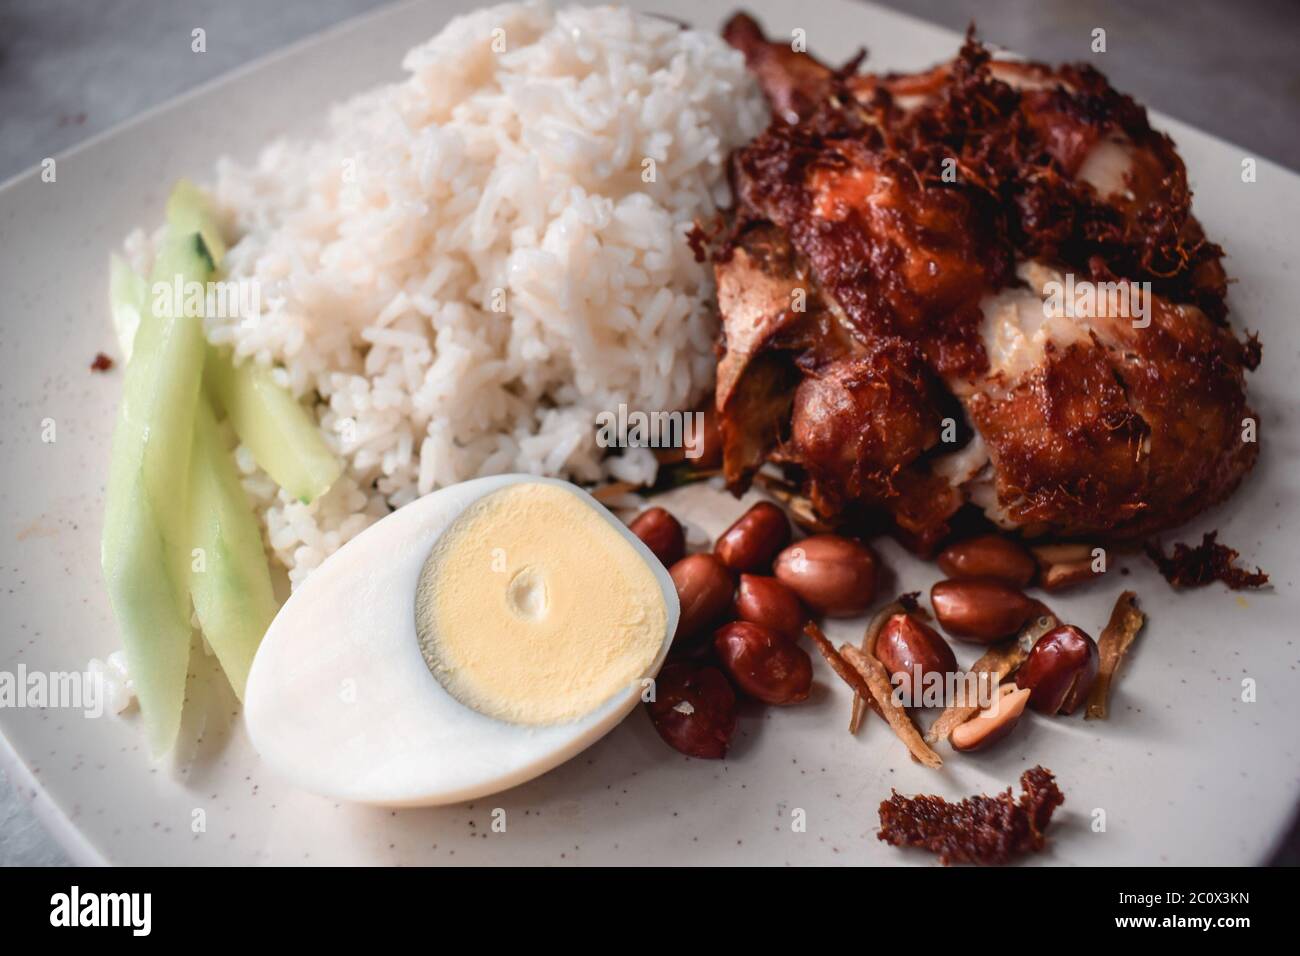 Spicy Malaysian food with chicken, rice, egg and peanuts Stock Photo